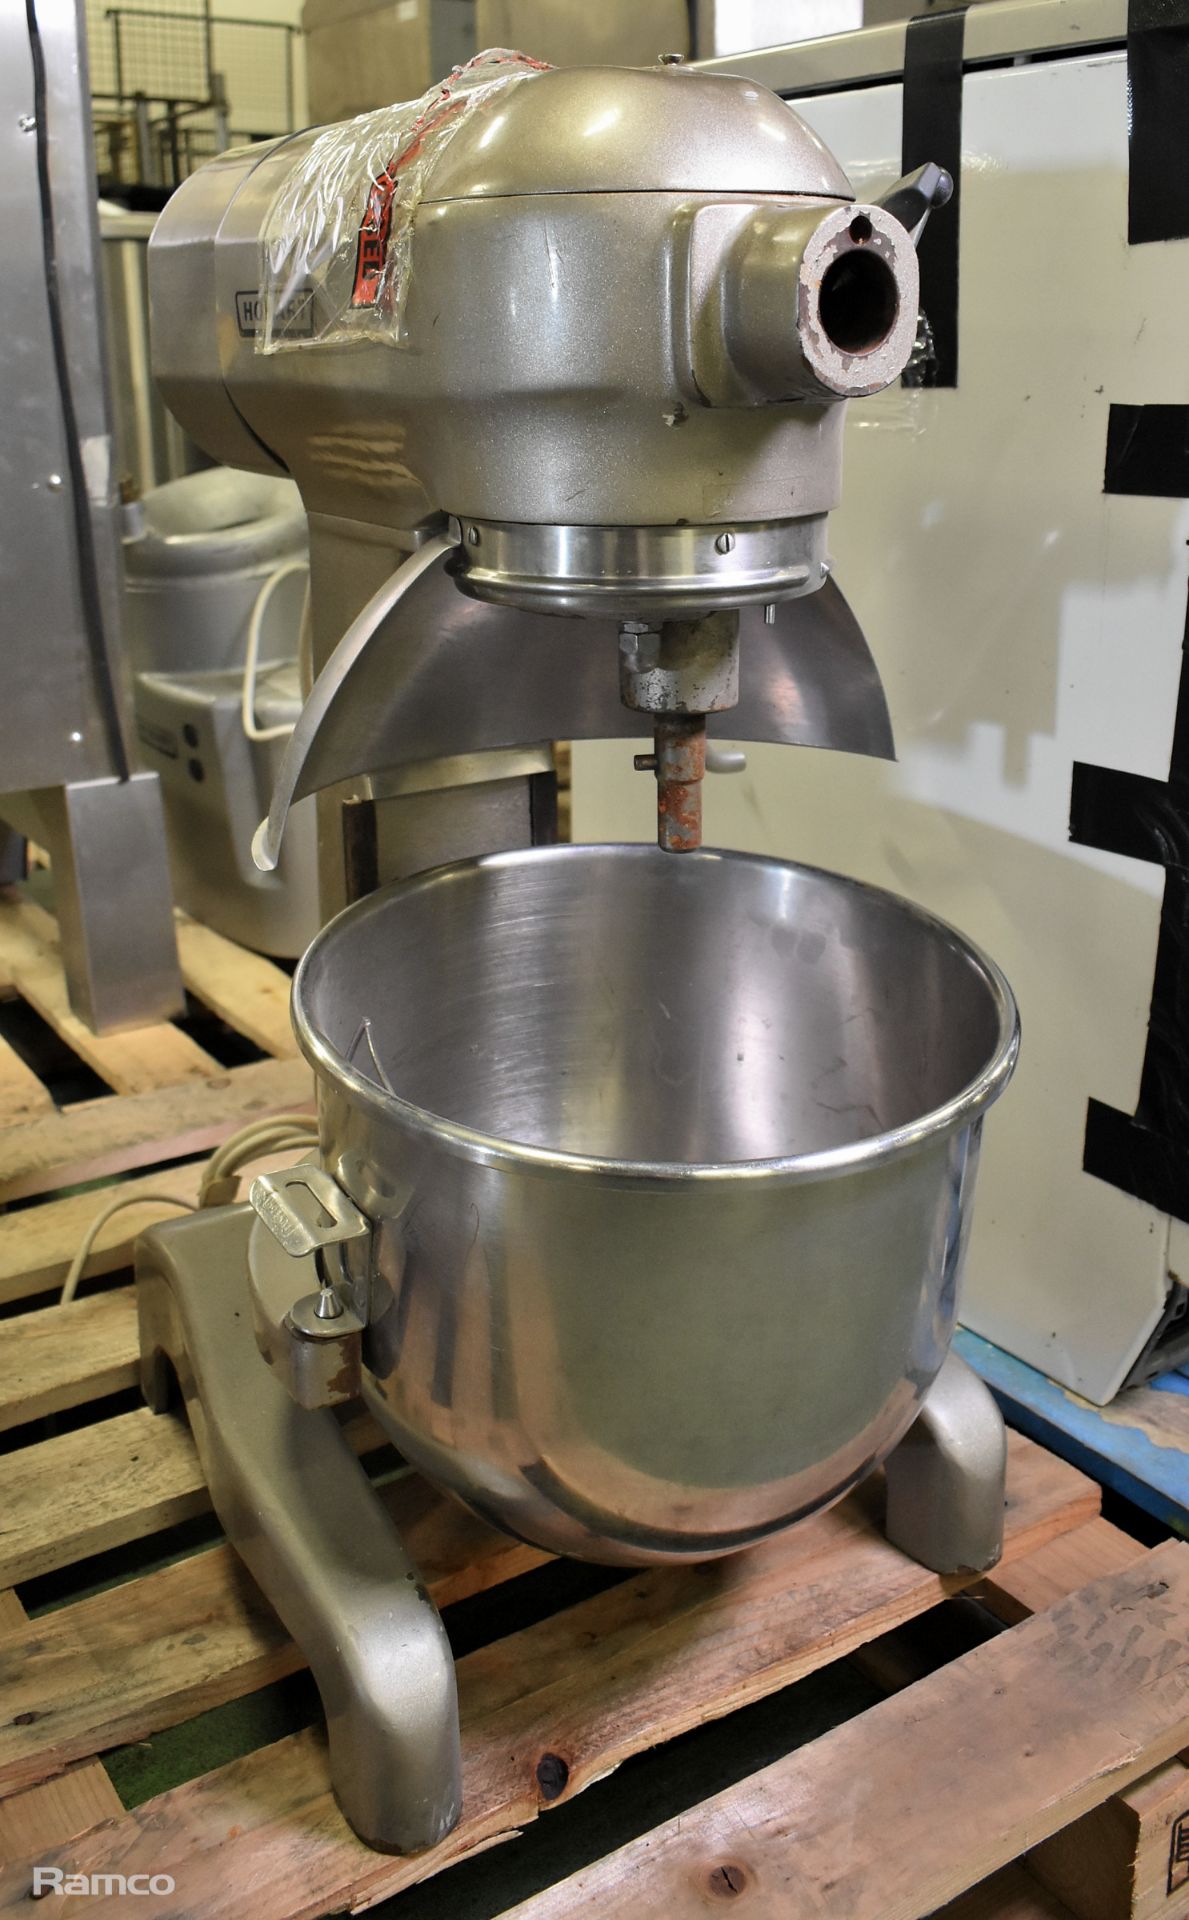 Hobart A200 20L bench mixer with bowl - W 460 x D 560 x H 780mm - Image 2 of 6